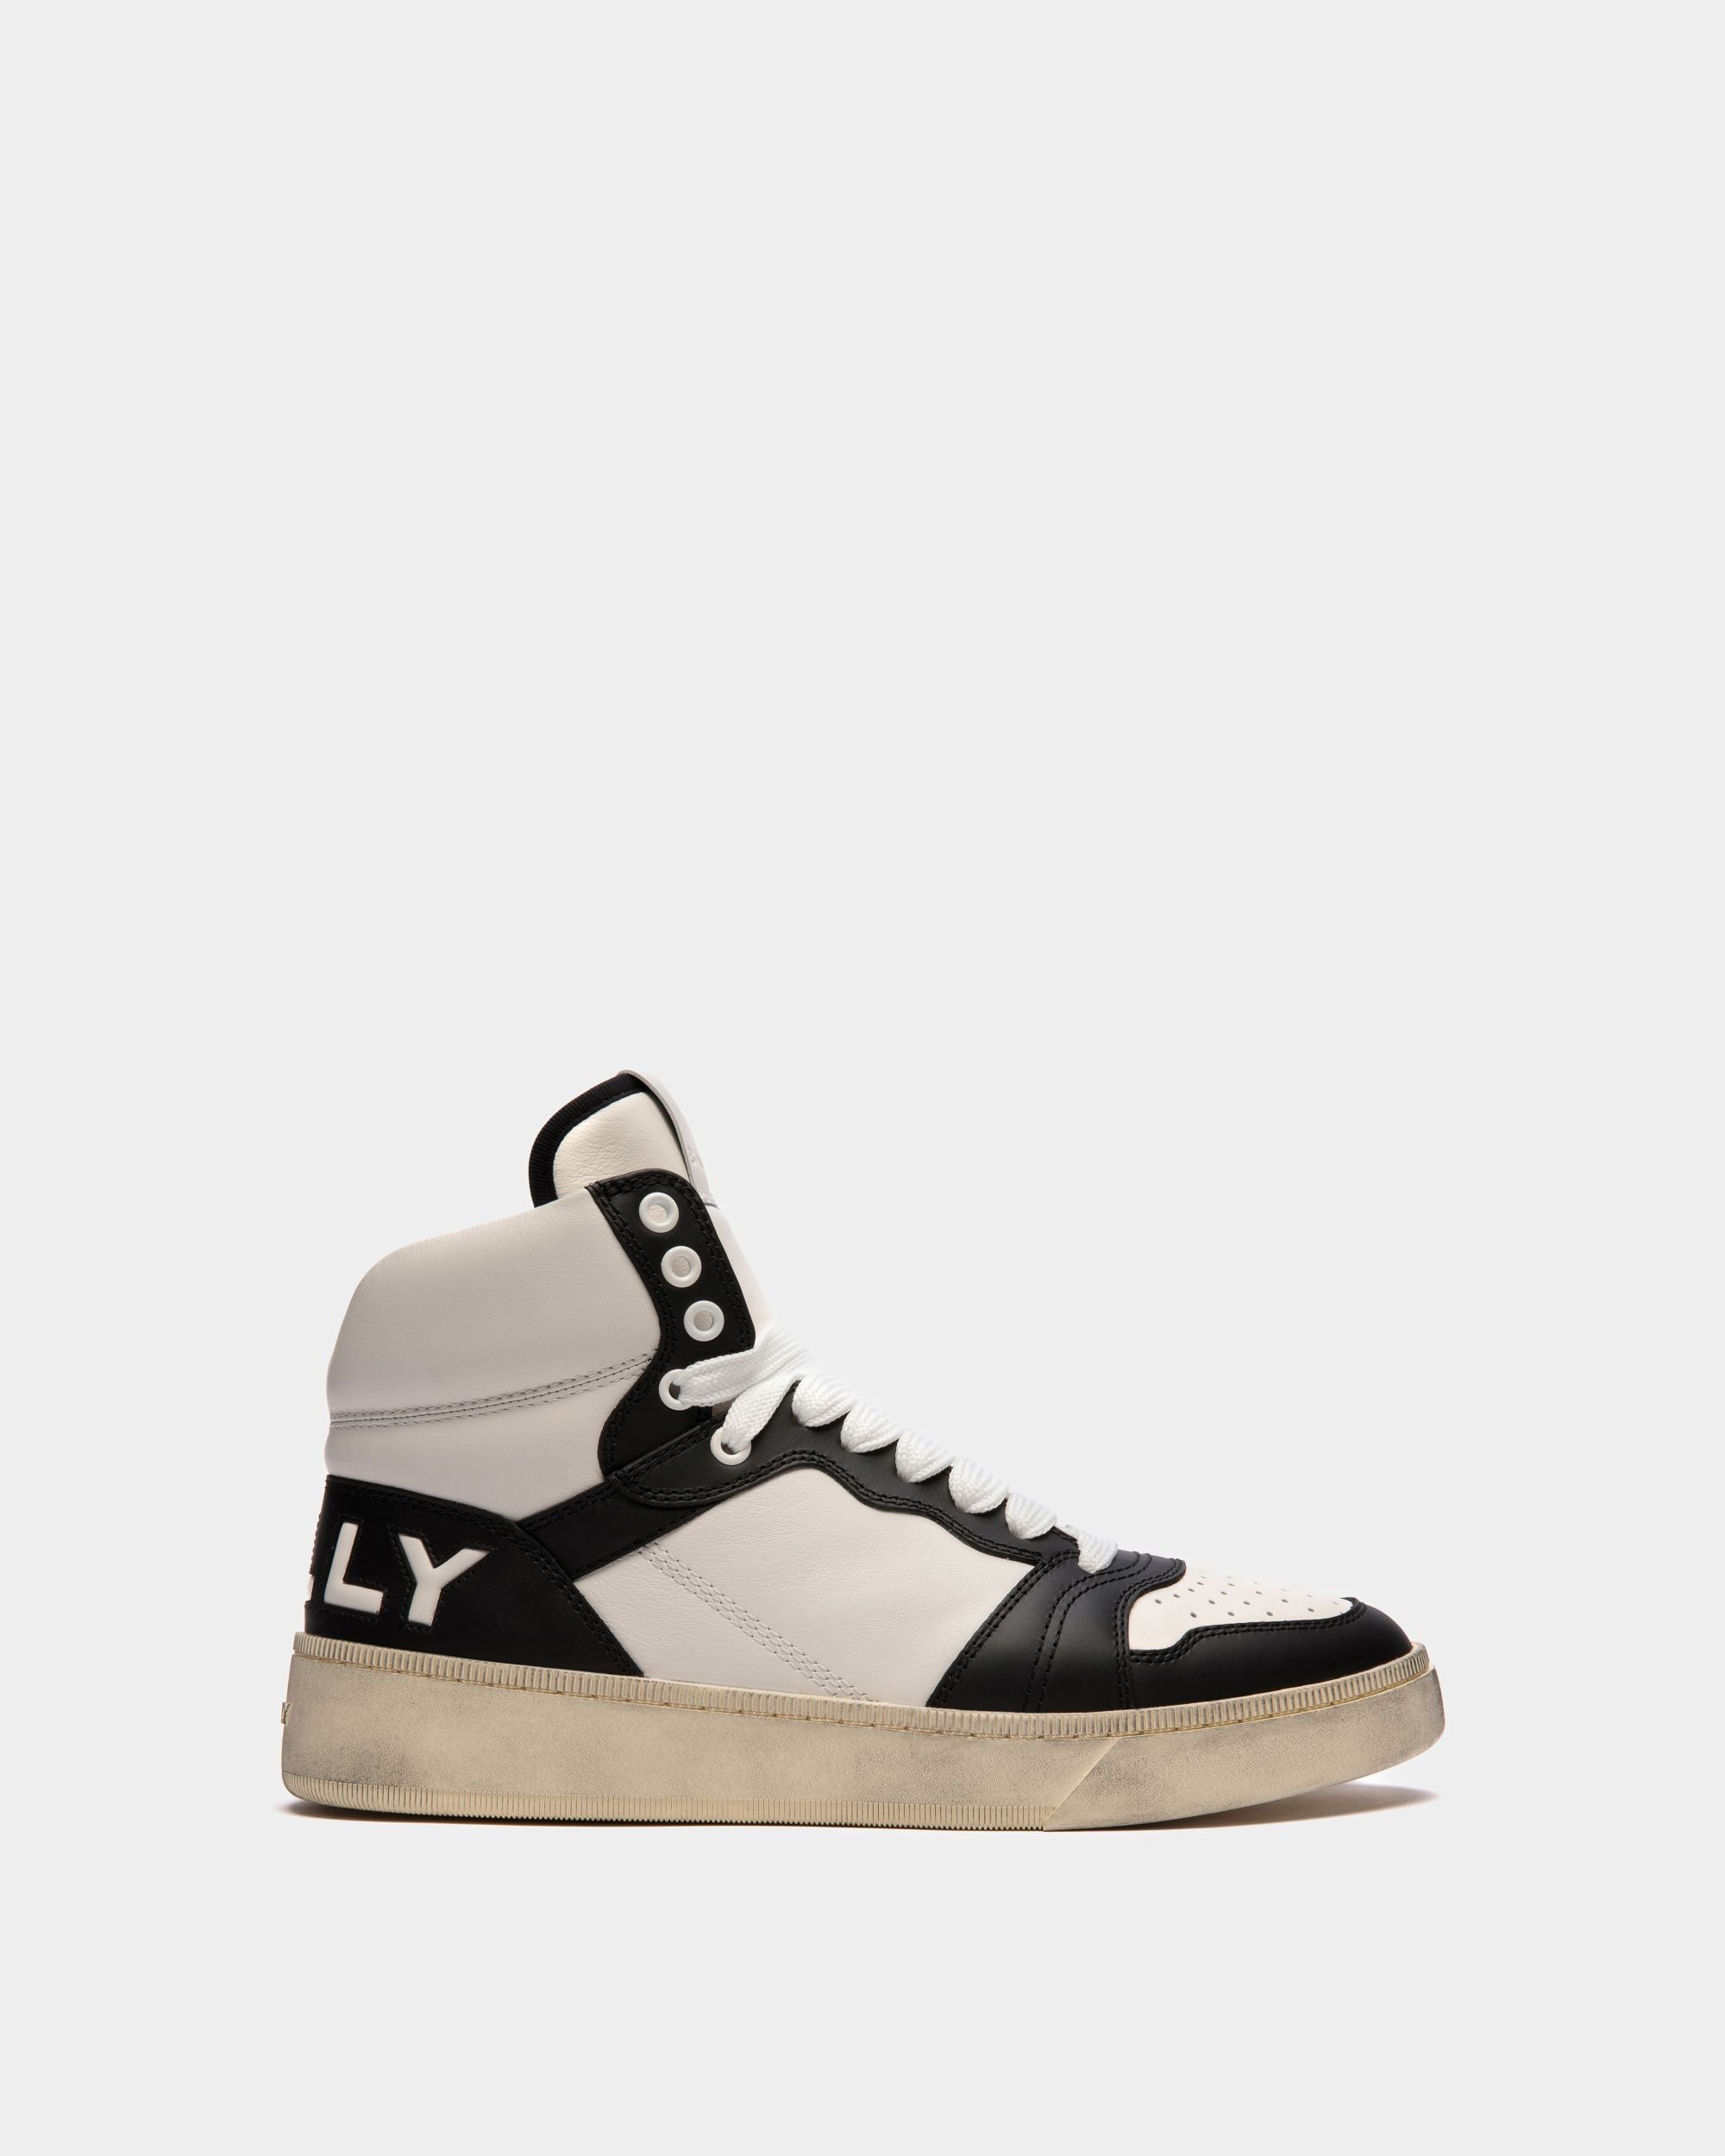 Raise | Men's High-Top Sneaker in Black And White Leather | Bally | Still Life Side